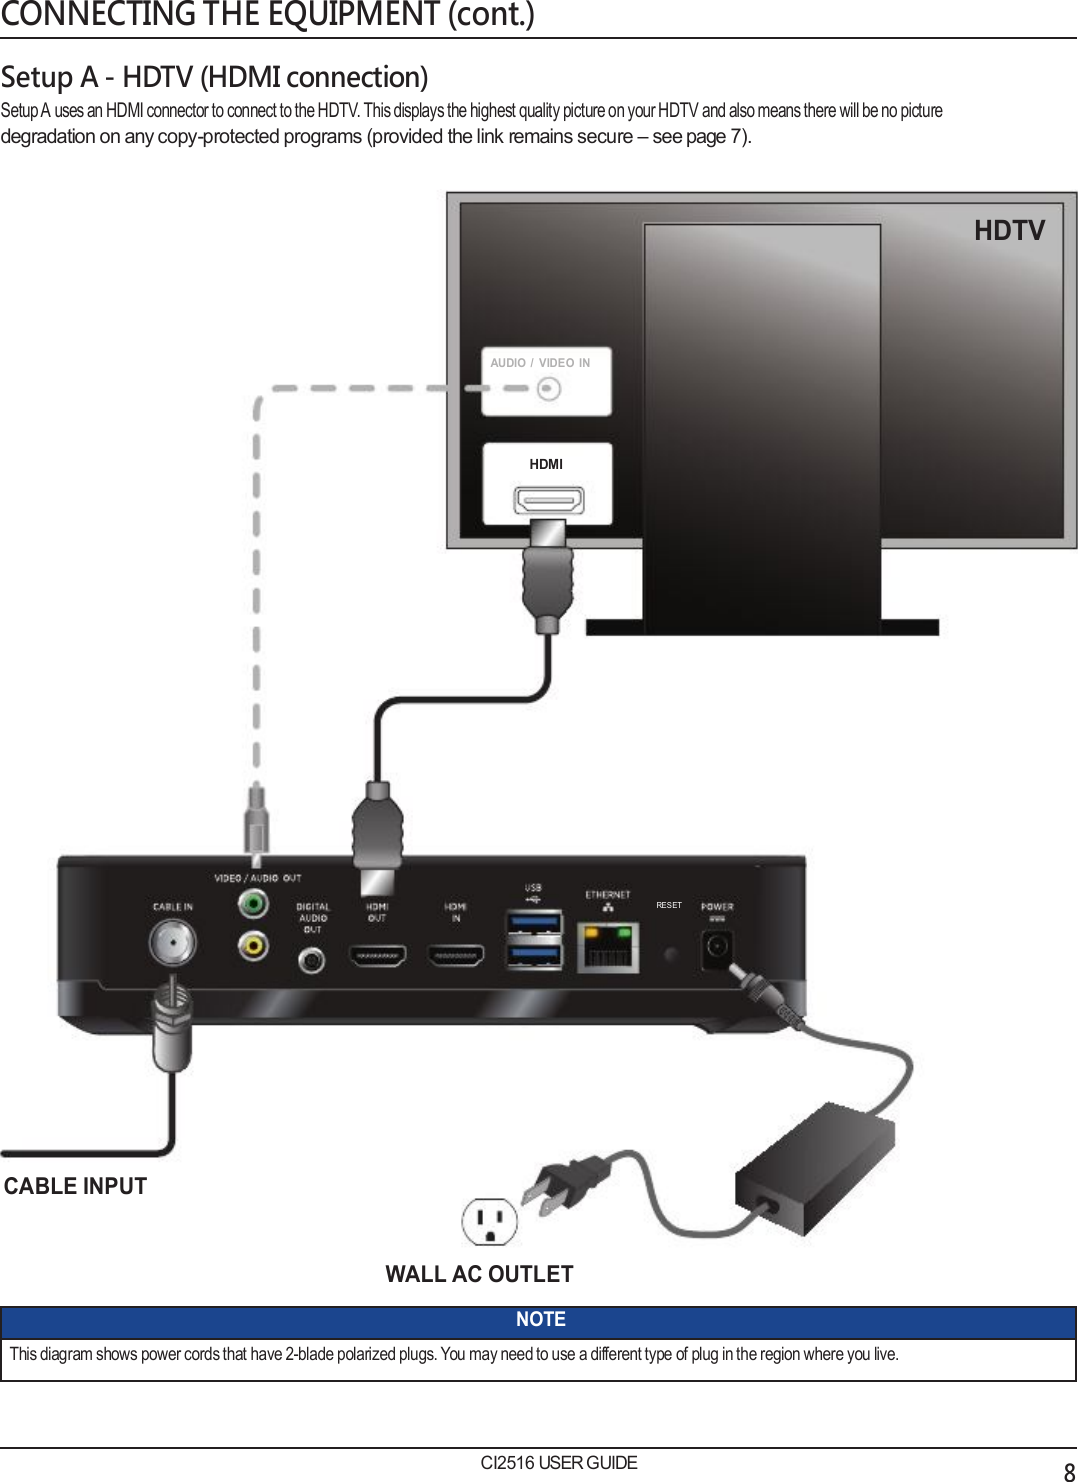   CONNECTING THE EQUIPMENT (cont.)  Setup A - HDTV (HDMI connection) Setup A uses an HDMI connector to connect to the HDTV. This displays the highest quality picture on your HDTV and also means there will be no picture degradation on any copy-protected programs (provided the link remains secure – see page 7).   HDTV     AUDIO  /  VIDEO  IN    HDMI                  RESET           CABLE INPUT  WALL AC OUTLET NOTE This diagram shows power cords that have 2-blade polarized plugs. You may need to use a different type of plug in the region where you live.    CI2516 USER GUIDE 8 